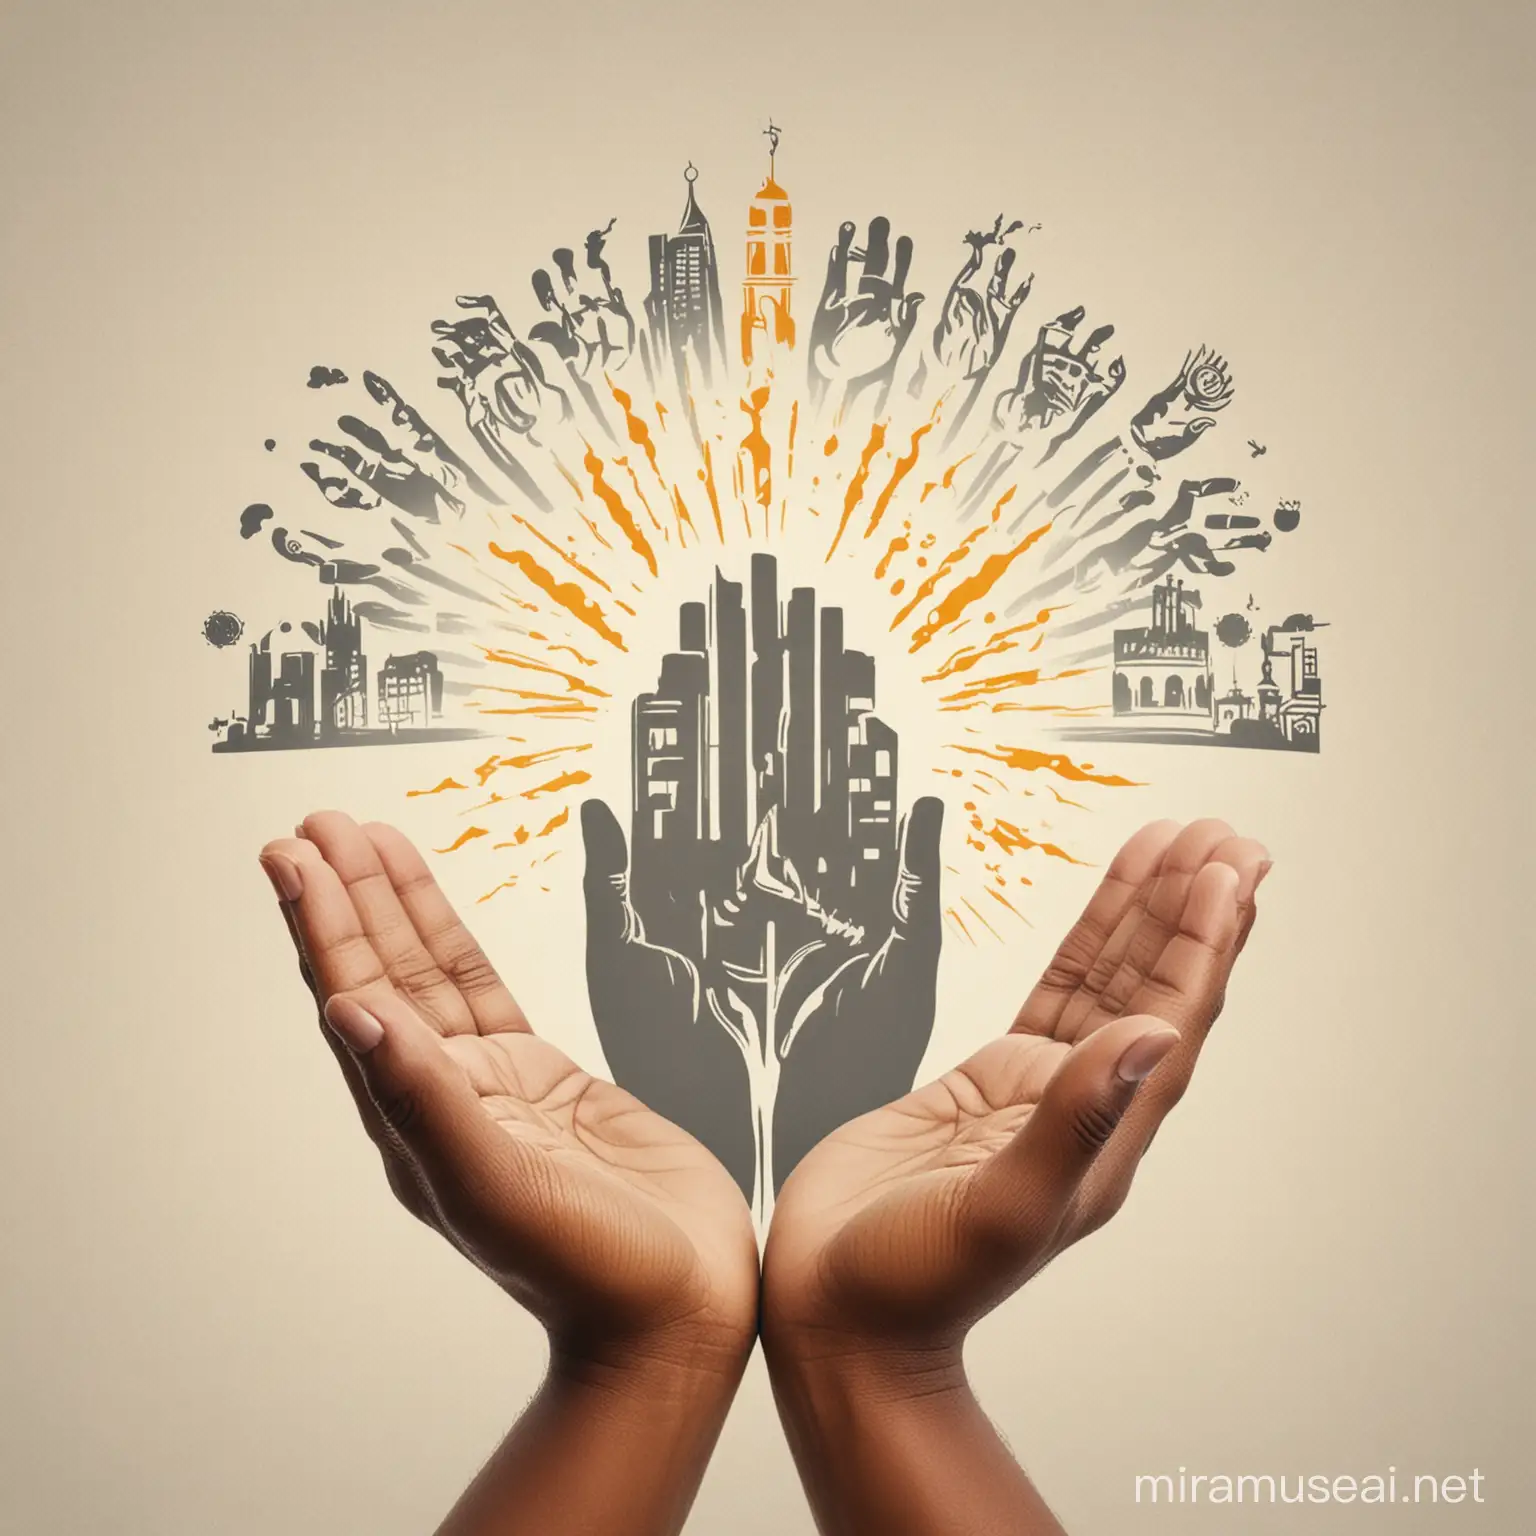 The logo for an IT company called Sundawa, depicts open hands praying with smart city images above the open hands